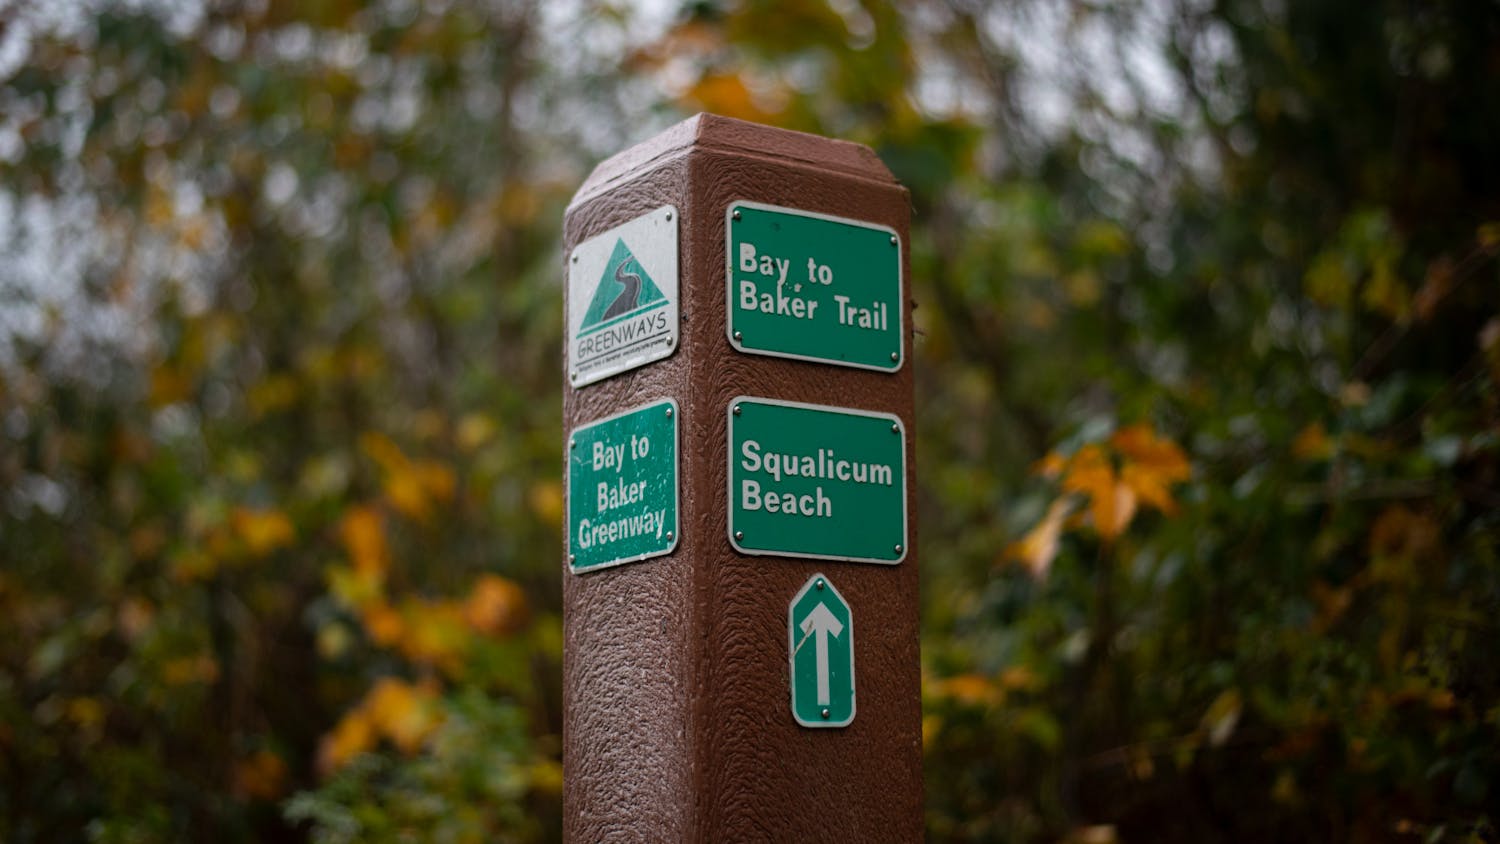 BAY TO BAKER TRAIL